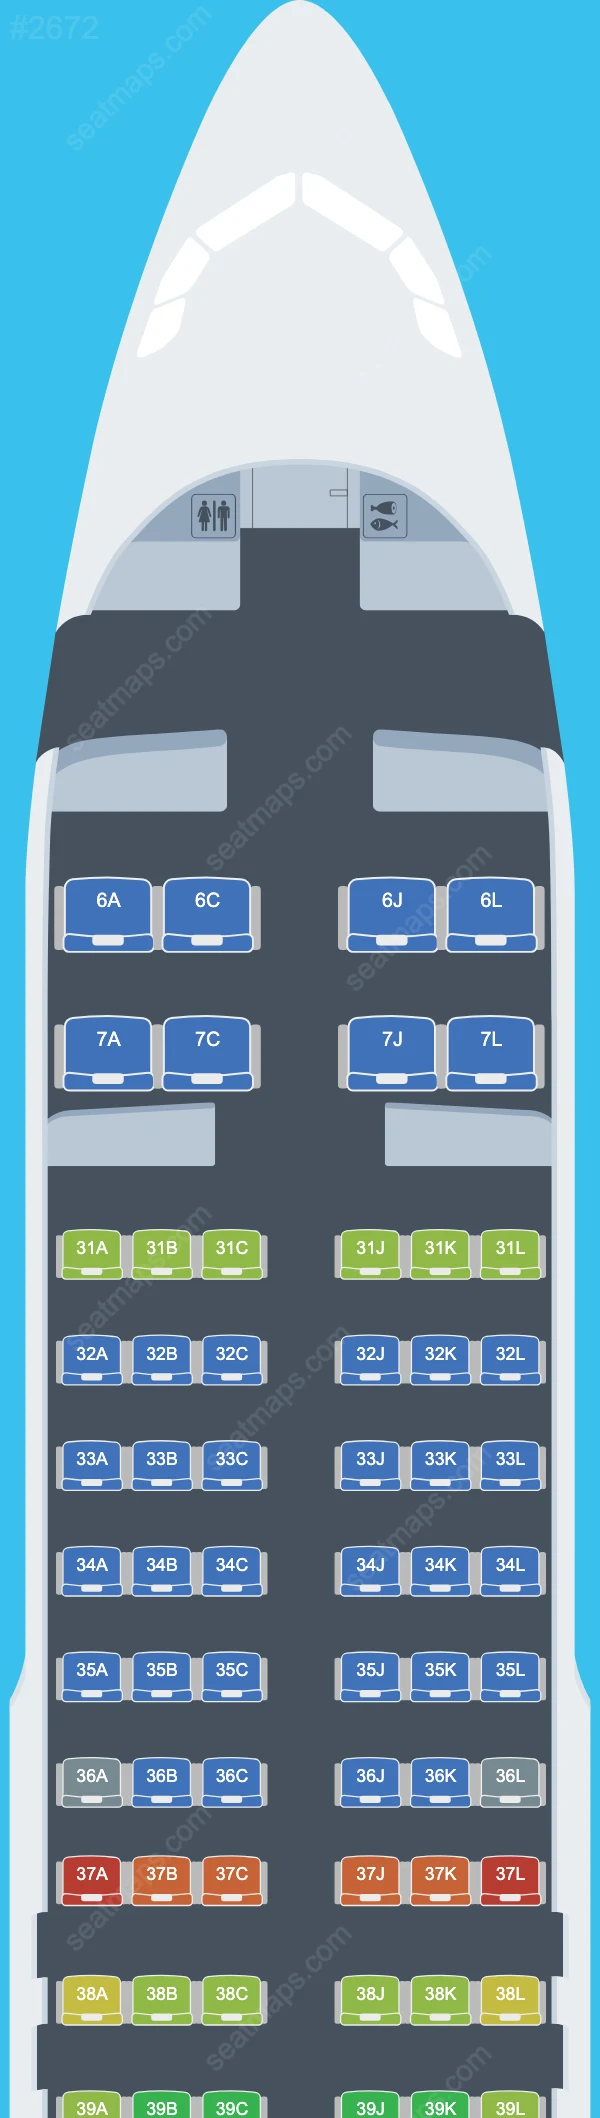 China Eastern Airbus A320-200 seatmap mobile preview